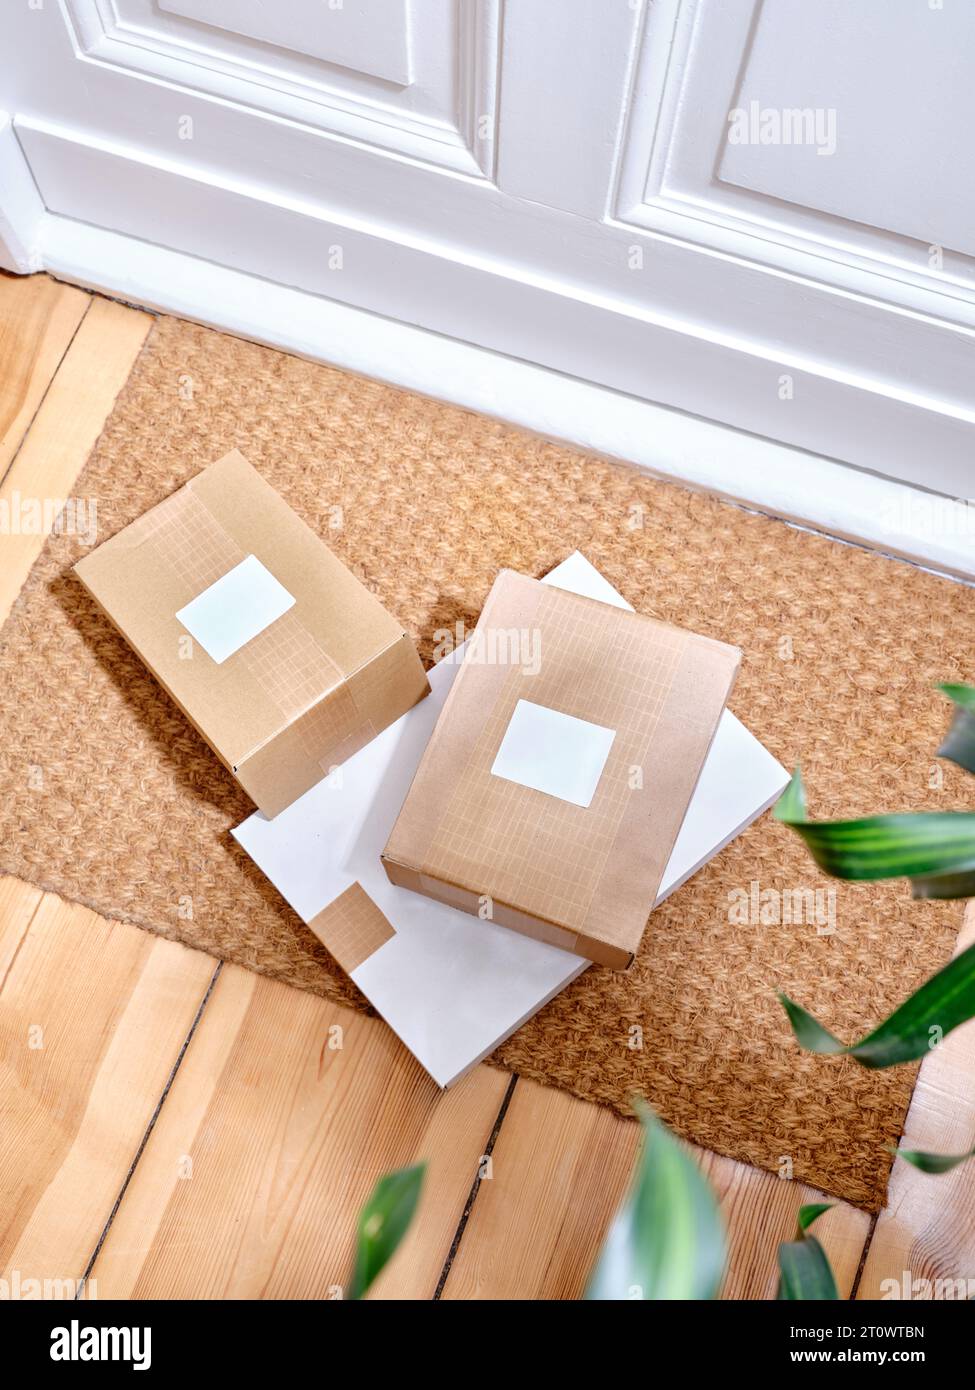 Stack of delivered cardboard parcels on a door mat next to apartment entrance Stock Photo